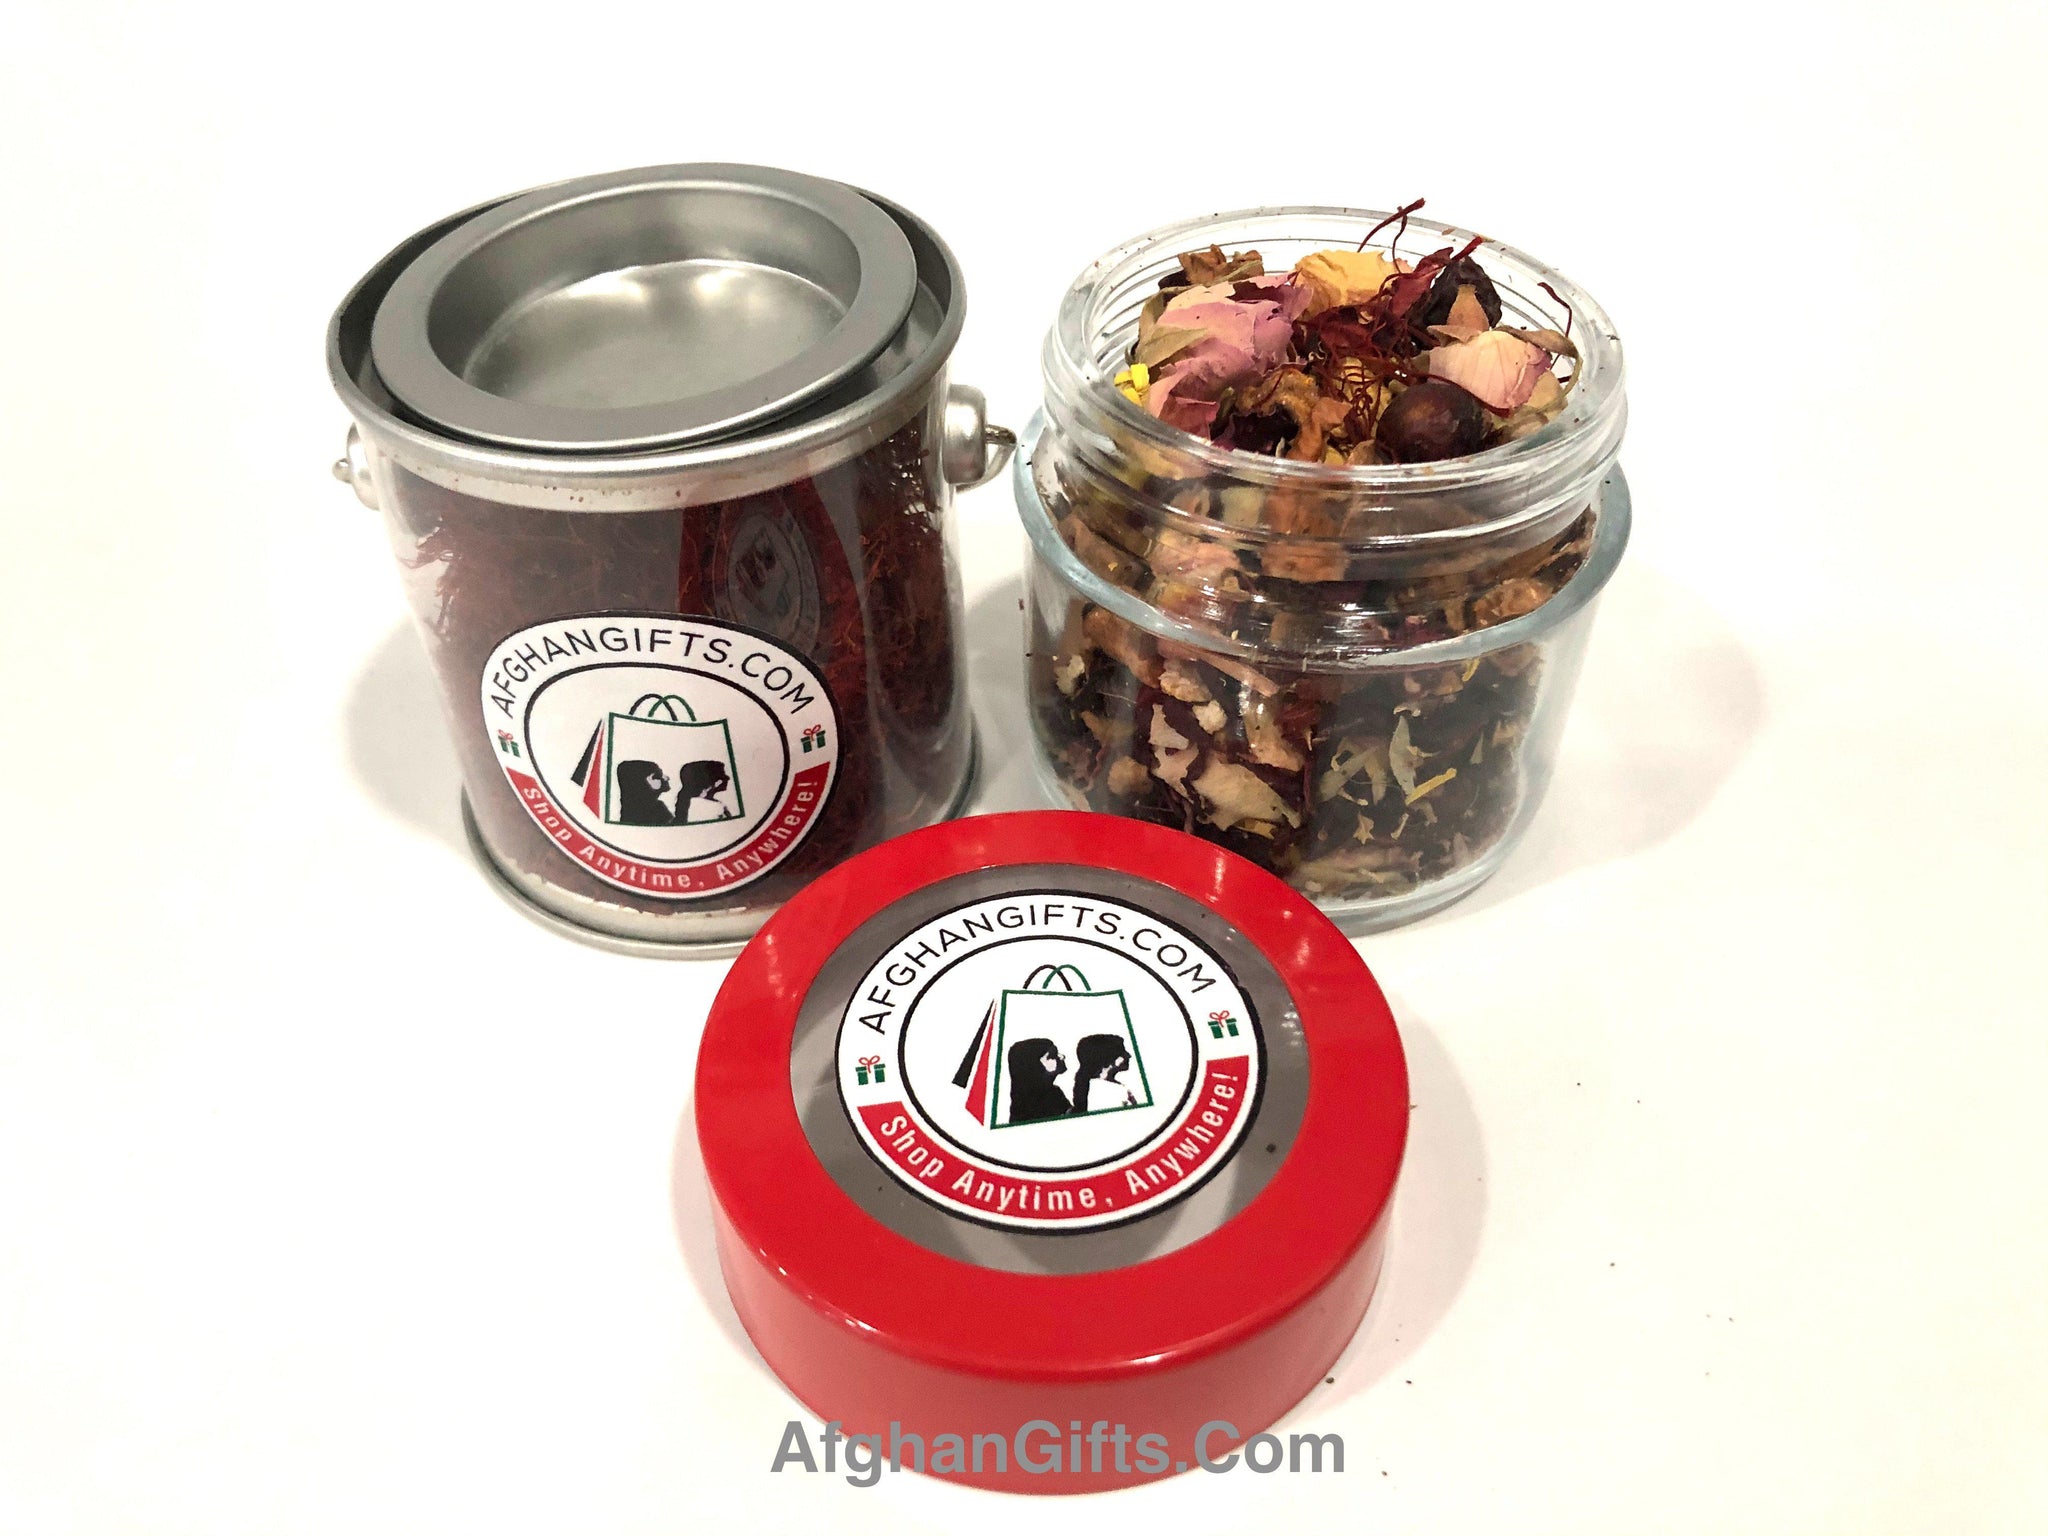 Turkish Love Tea infused with Saffron- 29 g - Afghan Gifts Shop